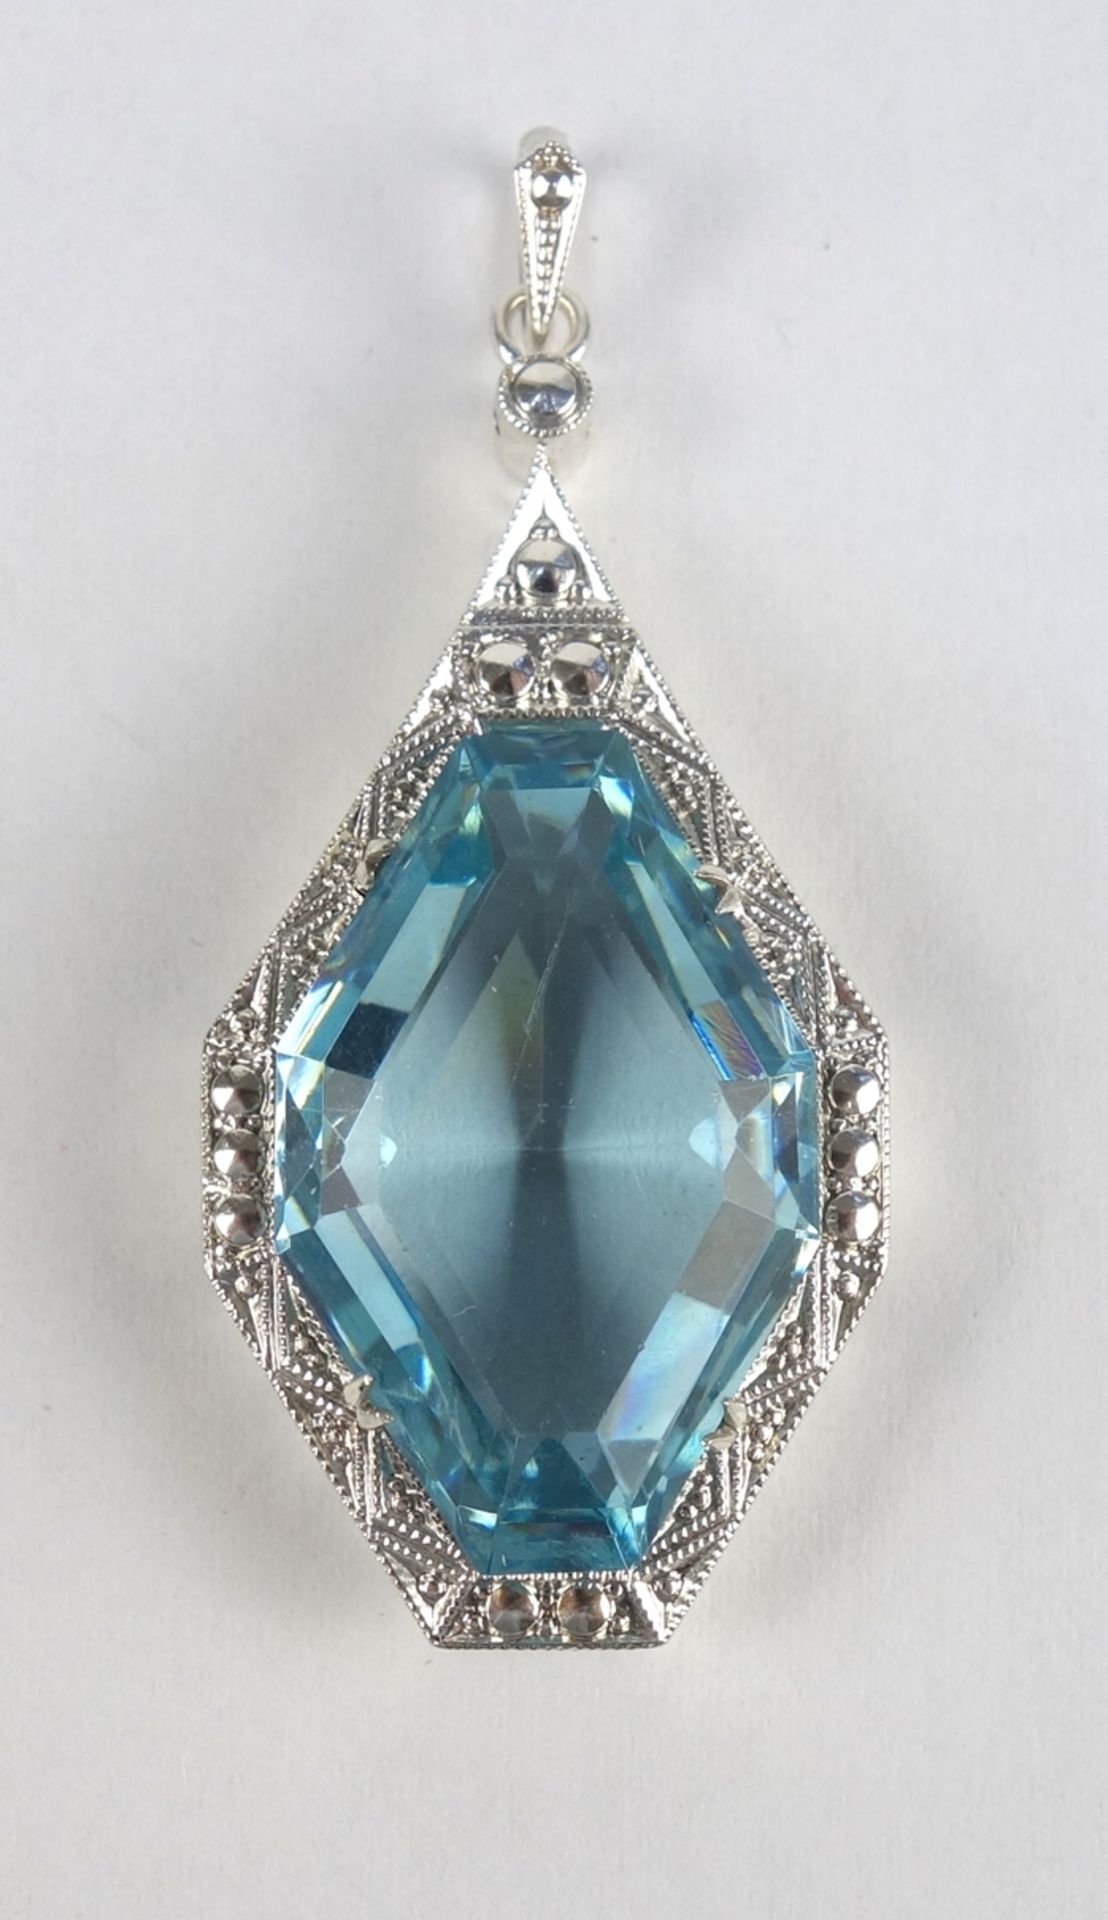 silver pendant with turquoise coloured stone, c. 1920